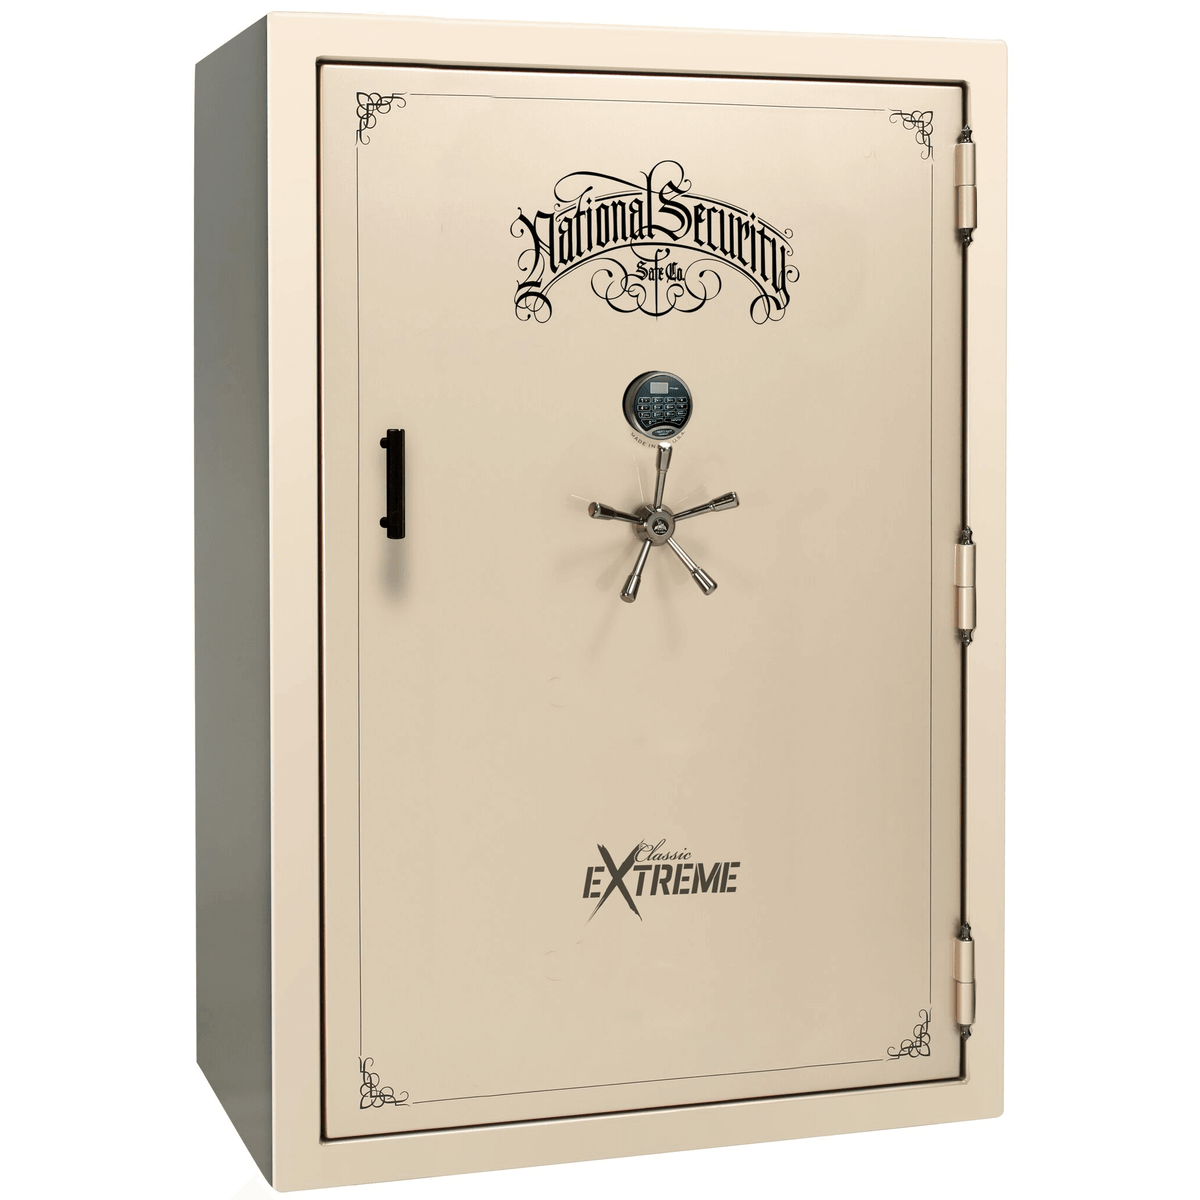 Liberty Classic Select Extreme Wide Body Safe in Champagne Gloss with Black Chrome Electronic Lock.